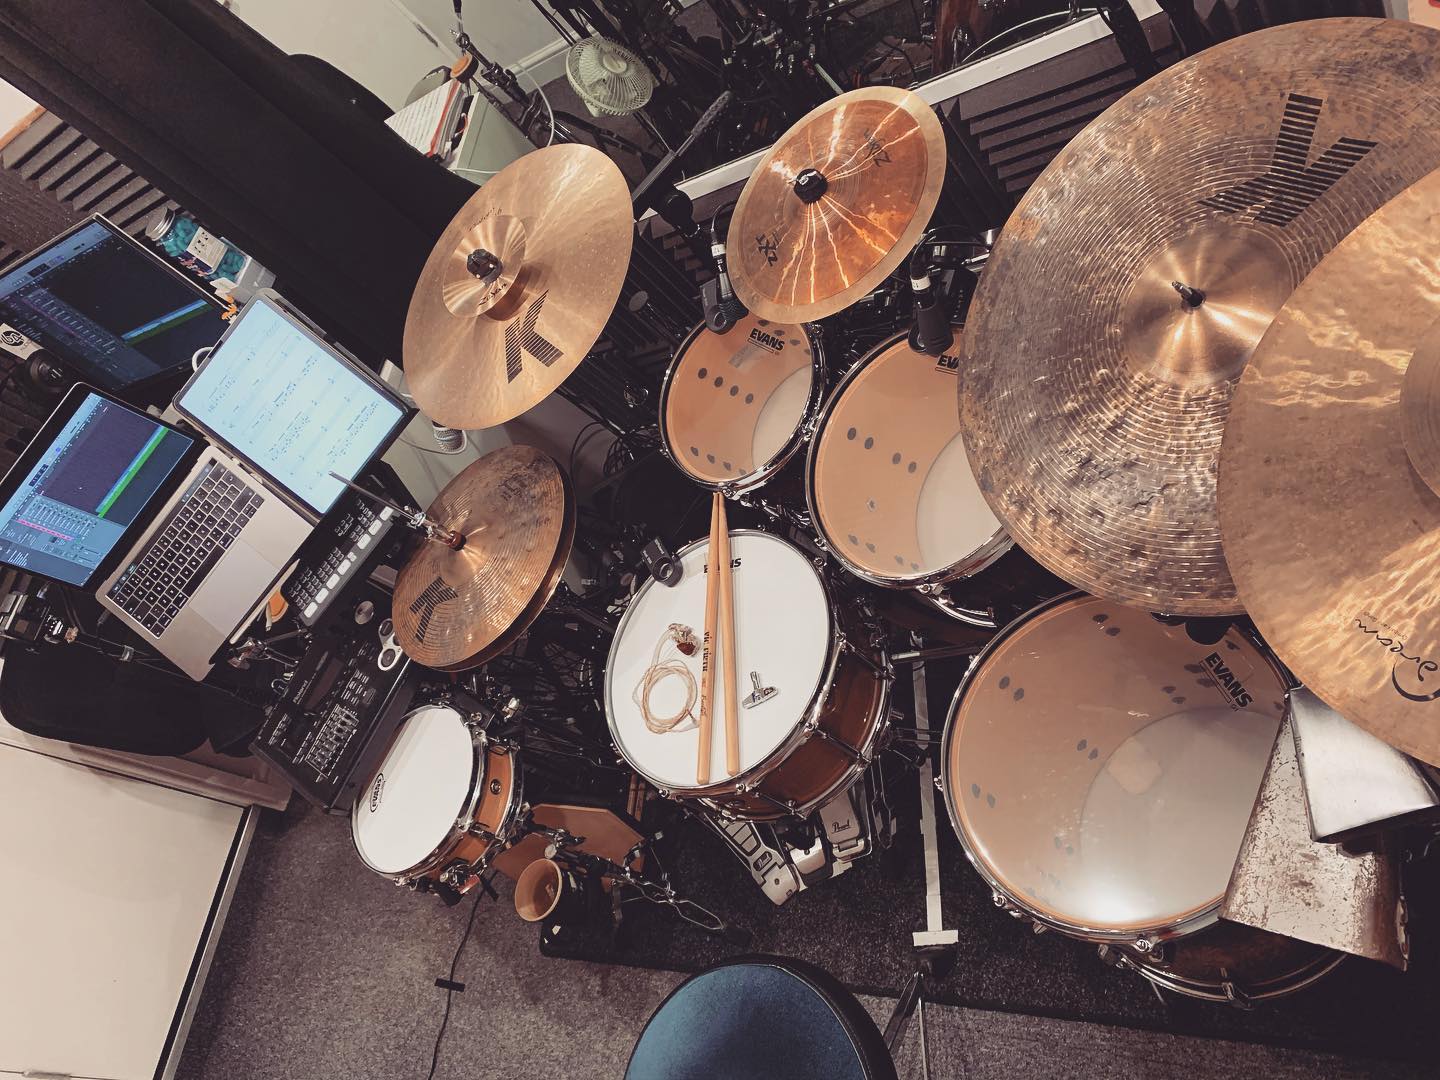 A kit pic from this morning’s remote drum session. If you would like me to record drums on your next song feel free to get in touch via my website (link in bio).
.
.
#drumsession #drumrecording #drums #drummer #instadrum #drumlife #pearldrums #zildjian #vicfirth #evansdrumheads #64audio